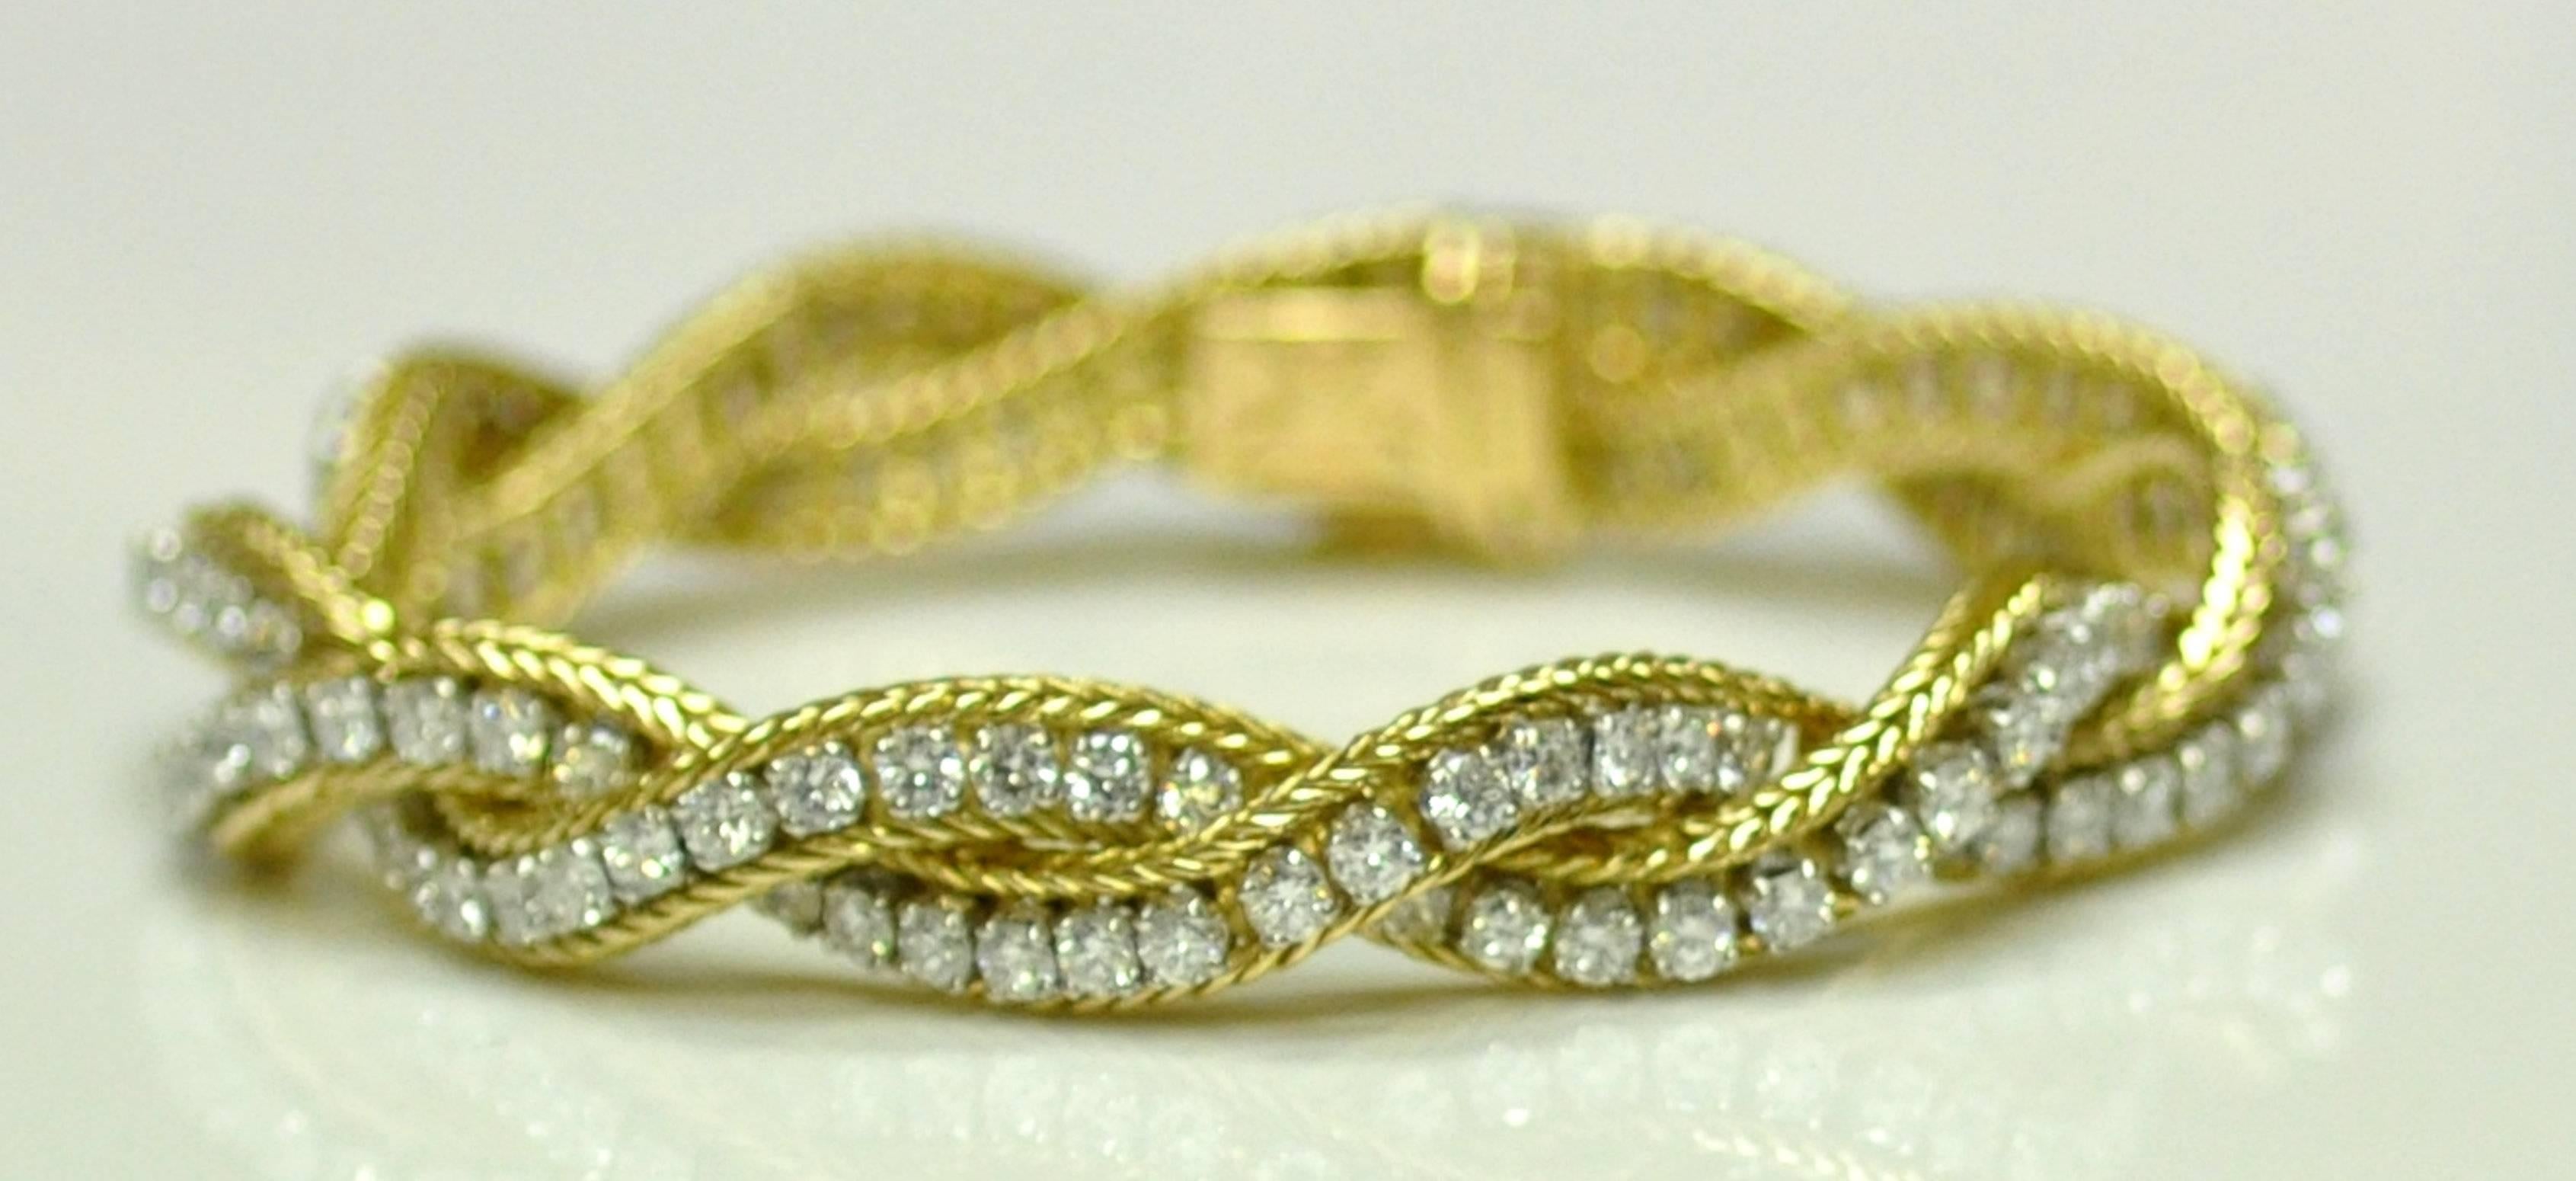 French-made Neiman Marcus bracelet is 18 karat and platinum.  Hallmarked and numbered.  Twist foxtail with prong set diamonds.  Contains 161 round diamonds 6.50 carats VS, G.  26.0 dwt. 